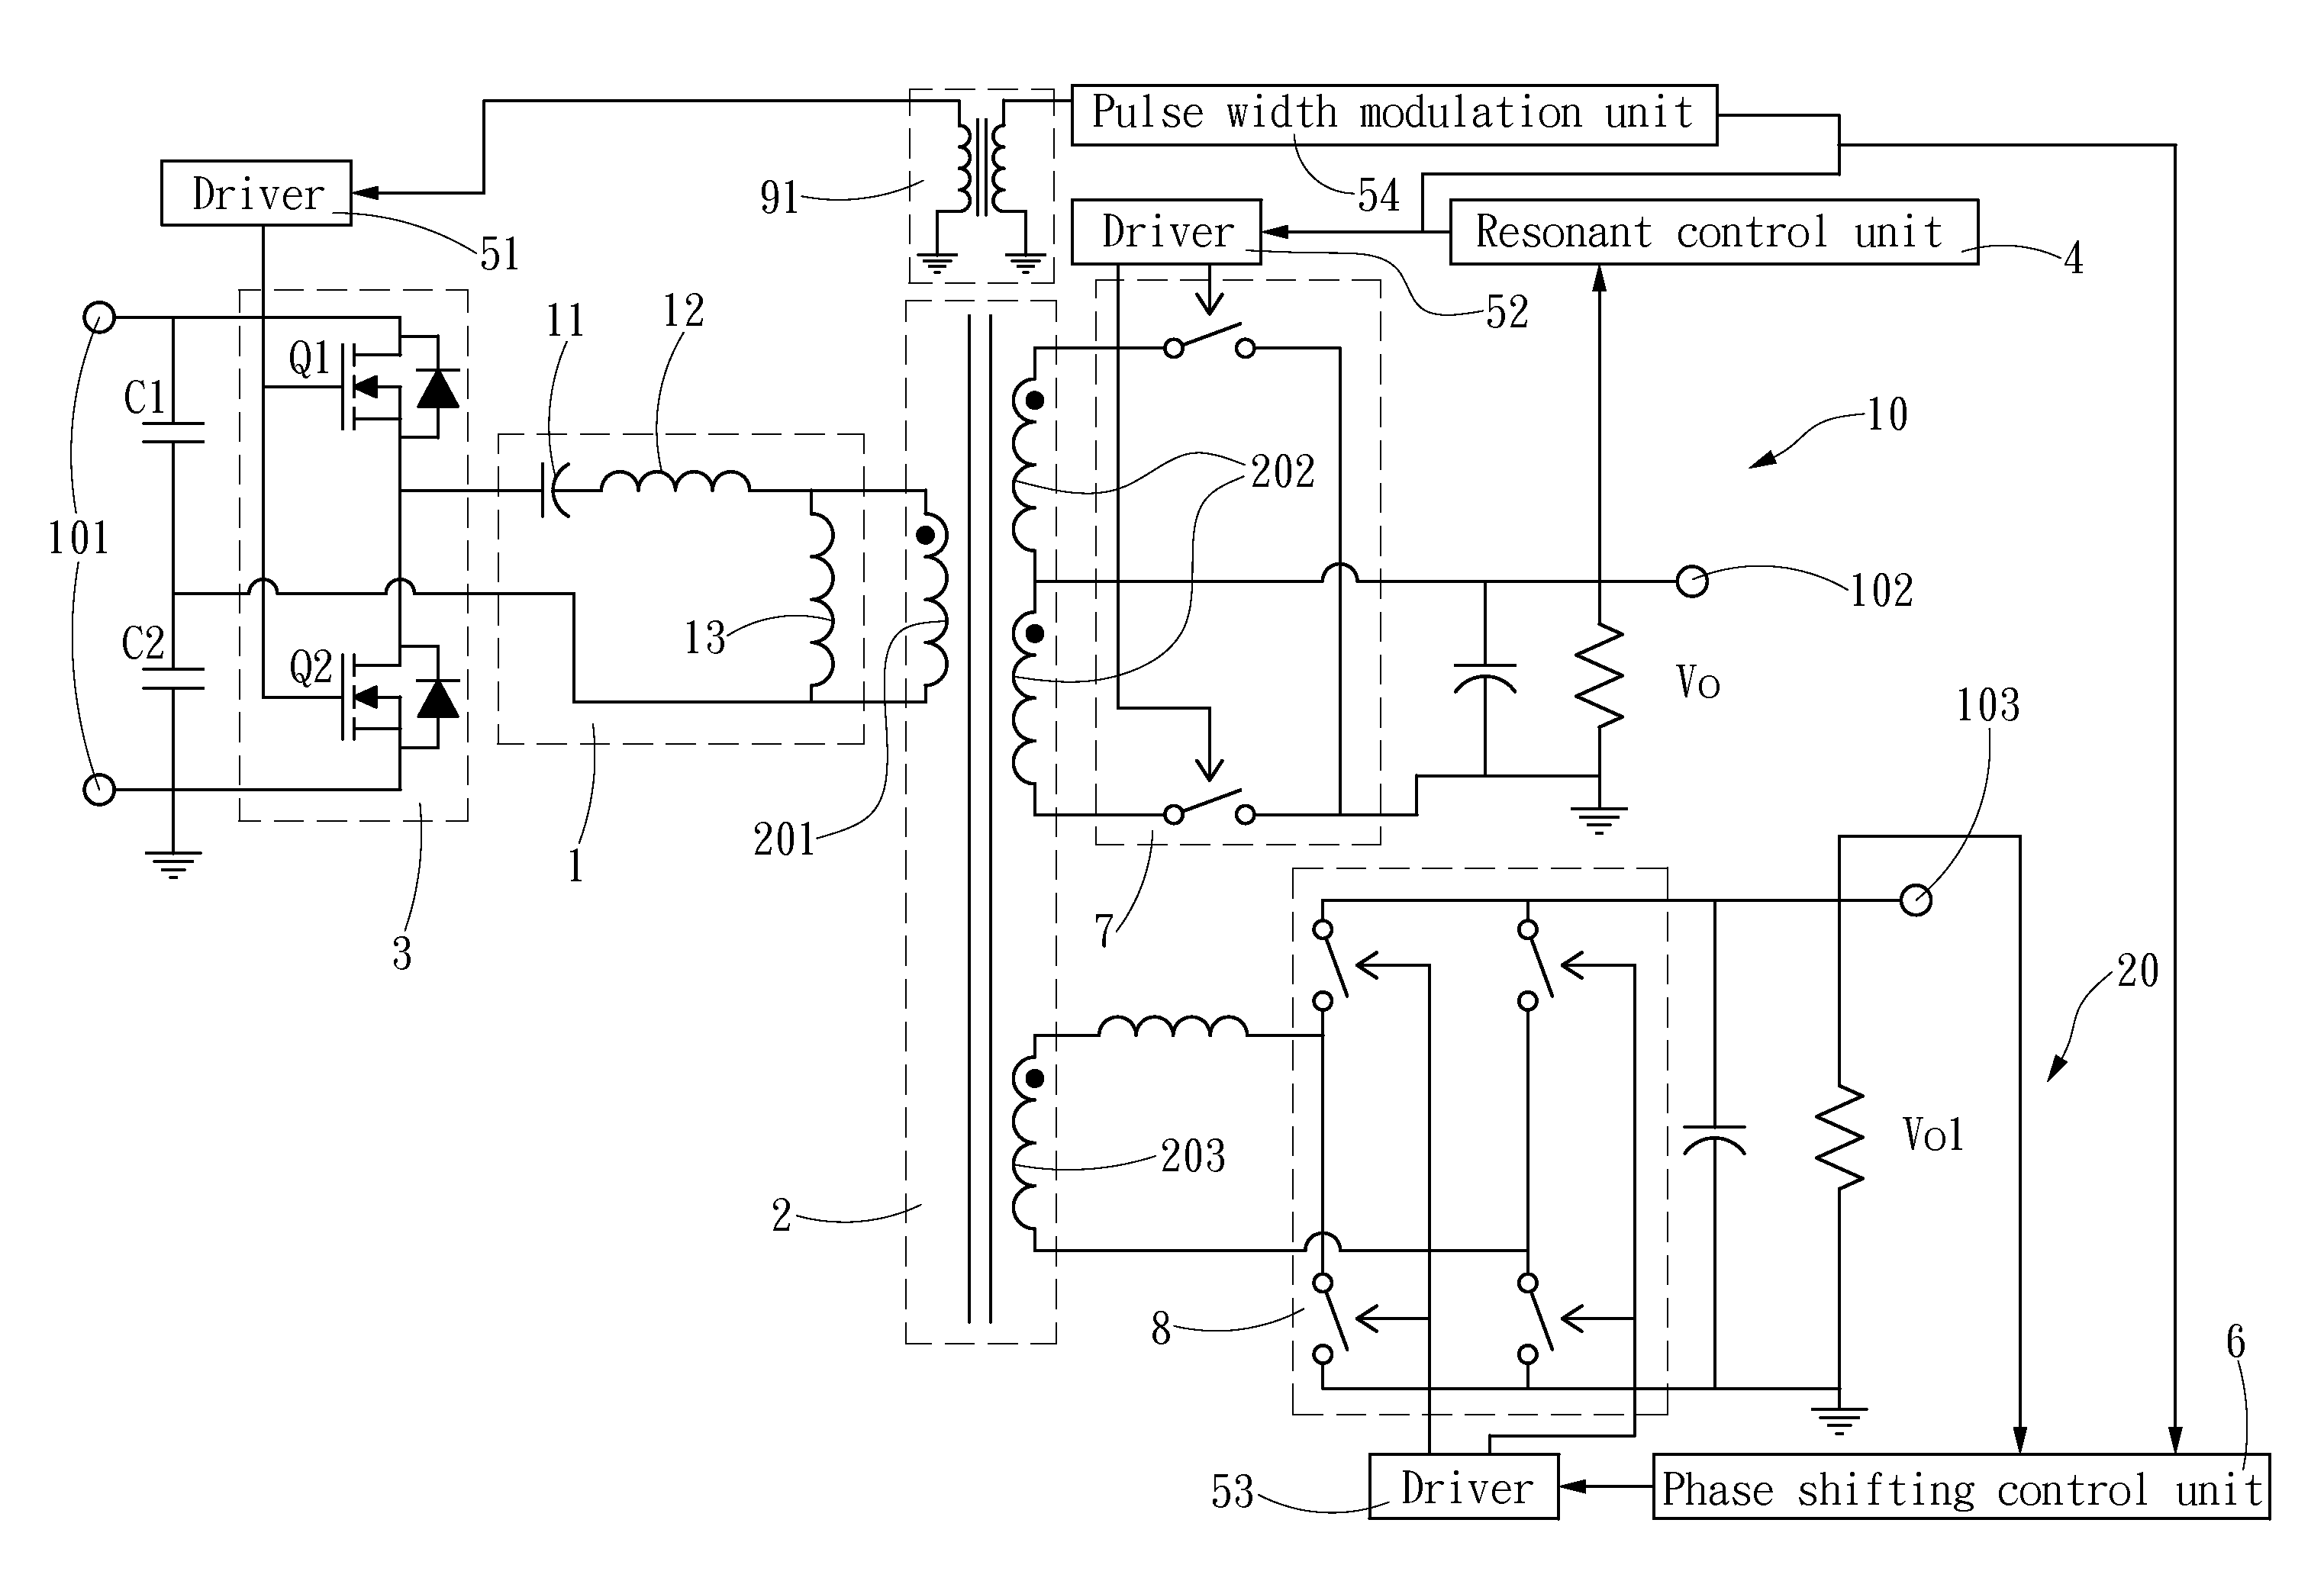 Resonant converter equipped with a phase shifting output circuit